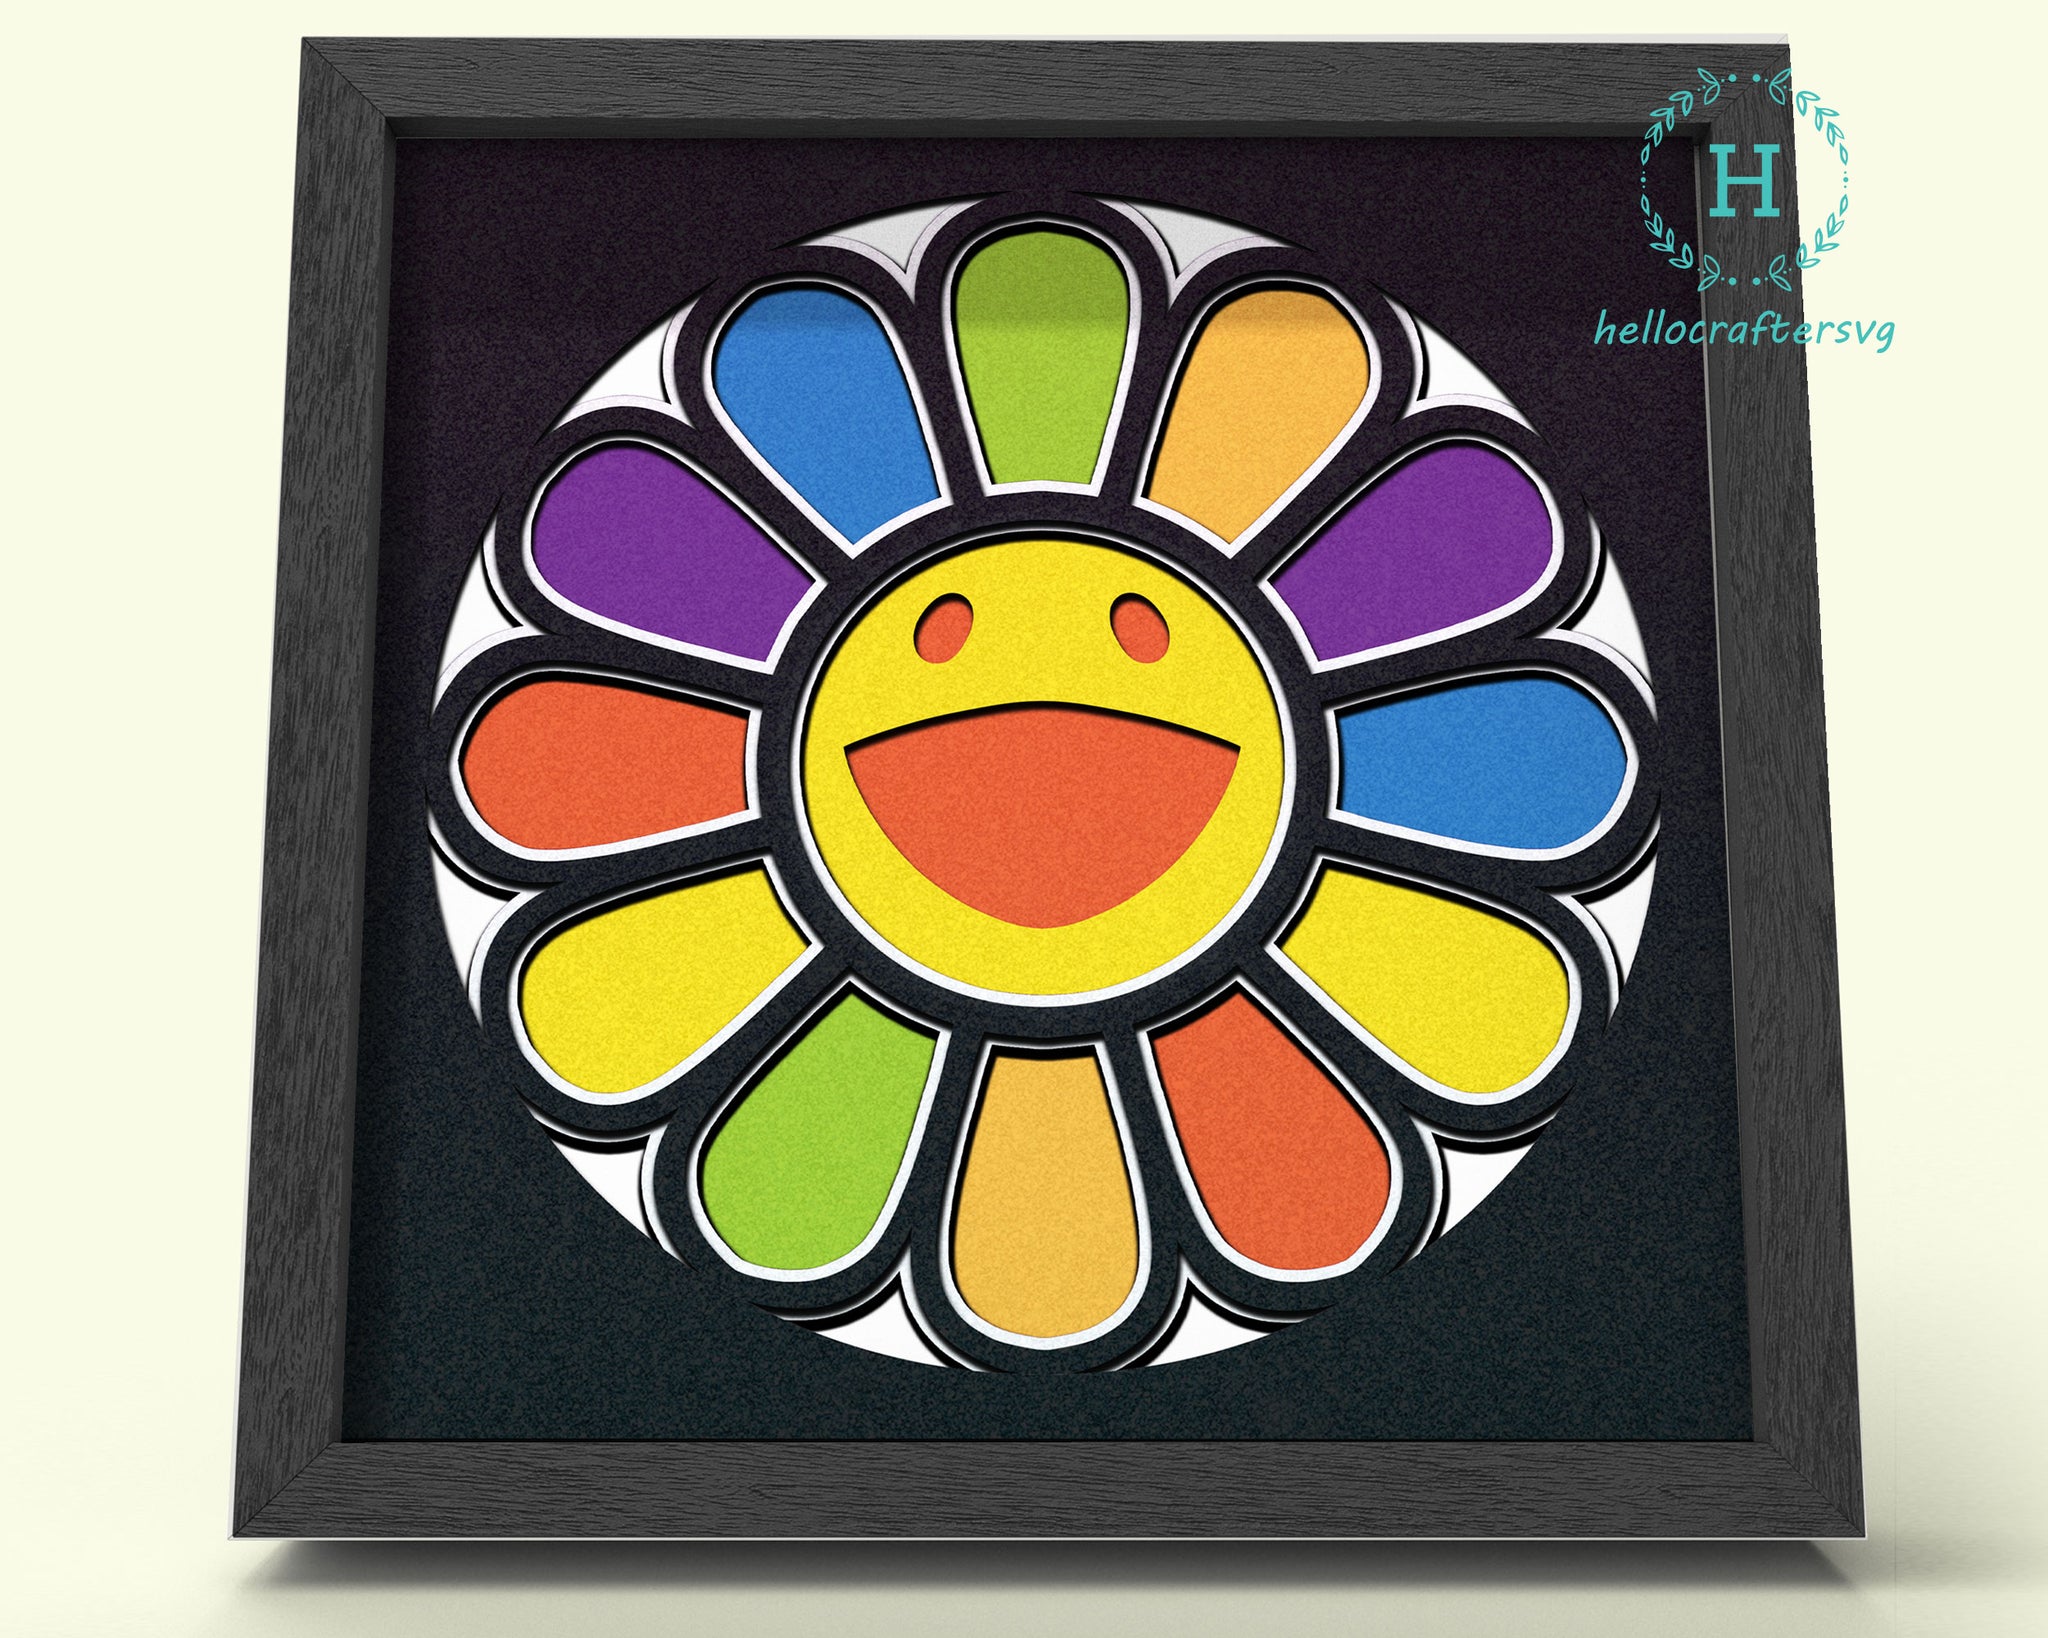 3D Smiley Svg, Smiley Sunflower Shadow Box Svg - Cricut Files, Cardstock Svg, Silhouette Files - HelloCrafterSvg-112